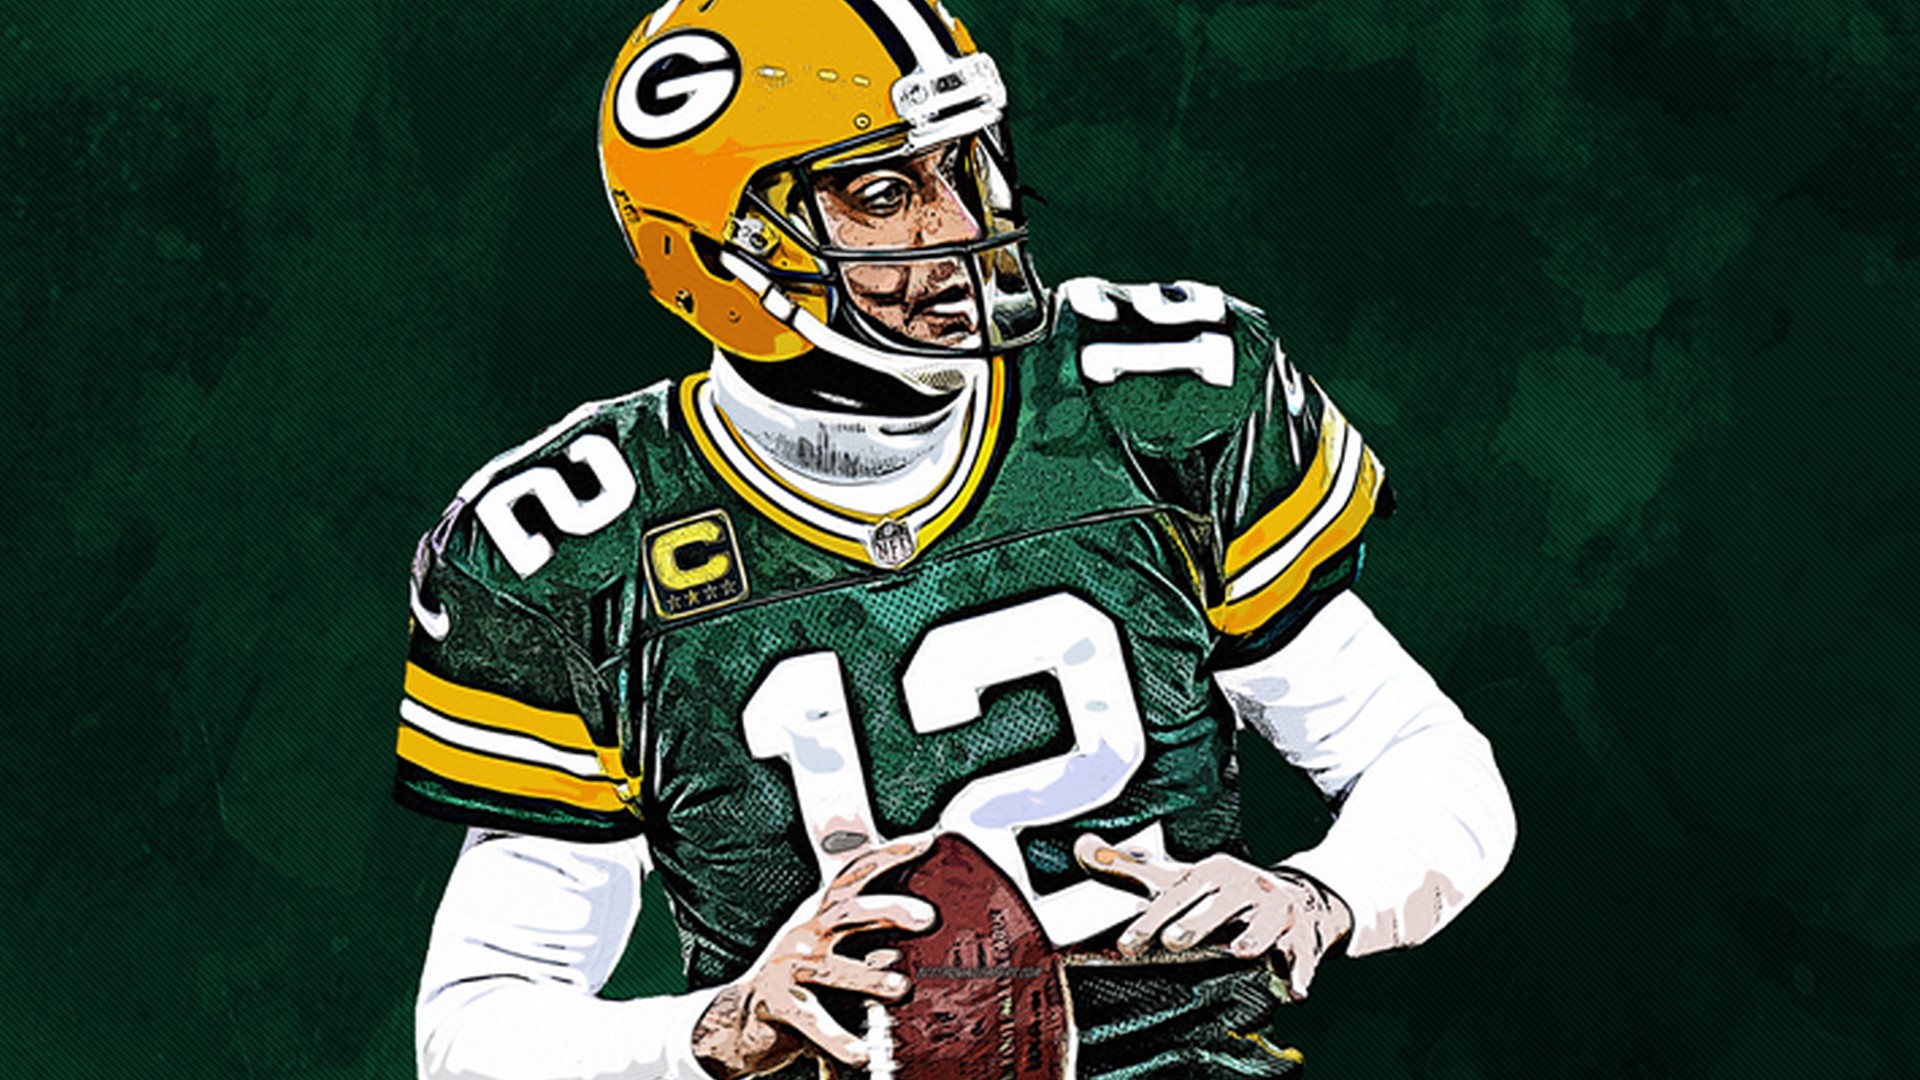 Aaron Rodgers Backgrounds HD with high-resolution 1920x1080 pixel. You can use this wallpaper for your Mac or Windows Desktop Background, iPhone, Android or Tablet and another Smartphone device